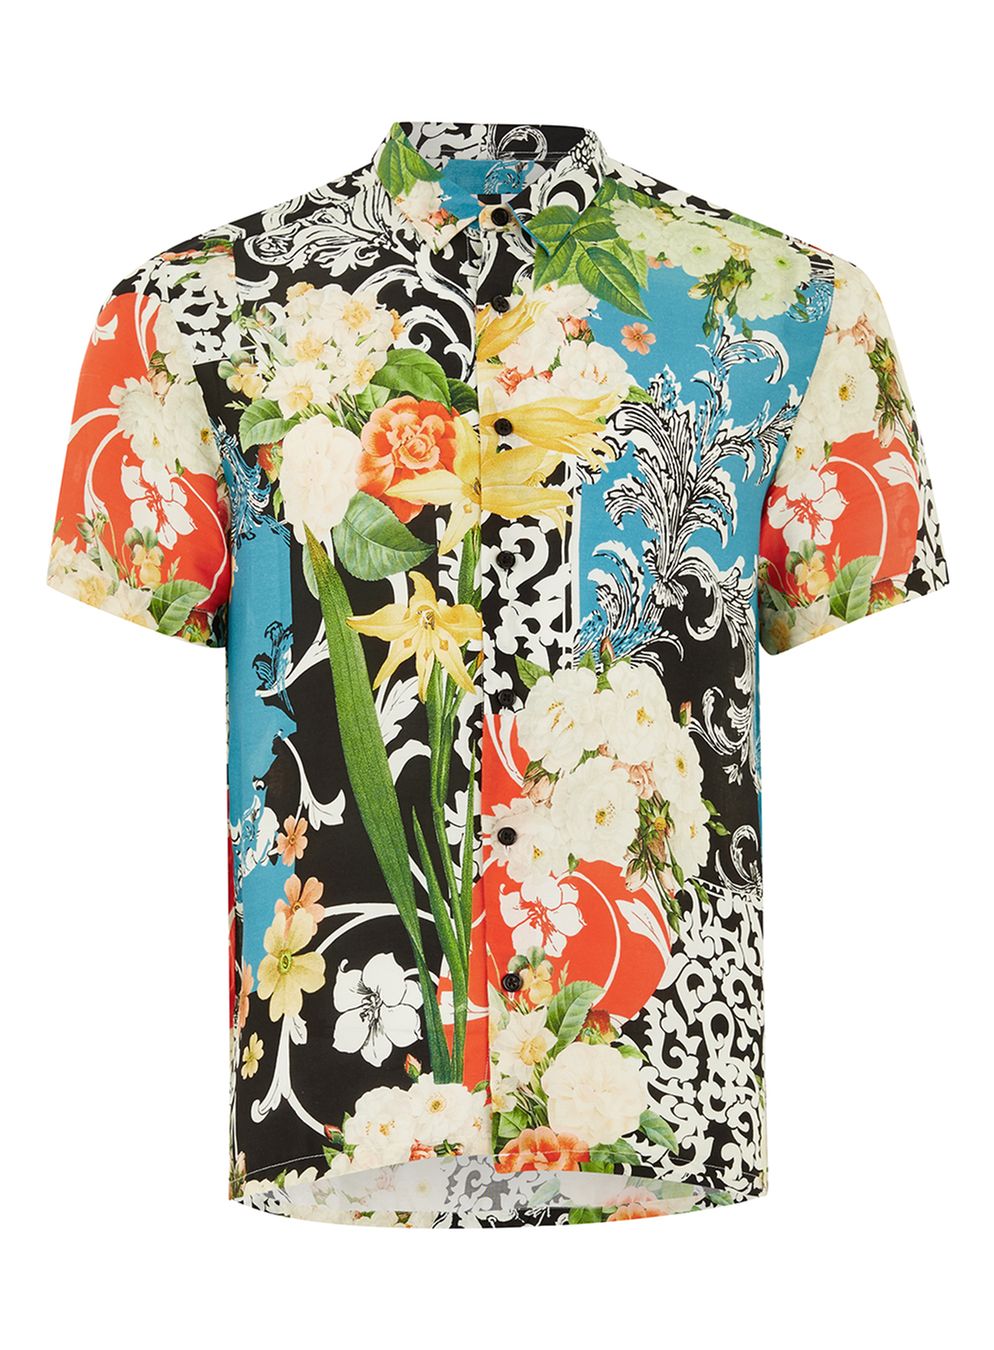 Wild Floral Print Shirt - Hello! We are wt+